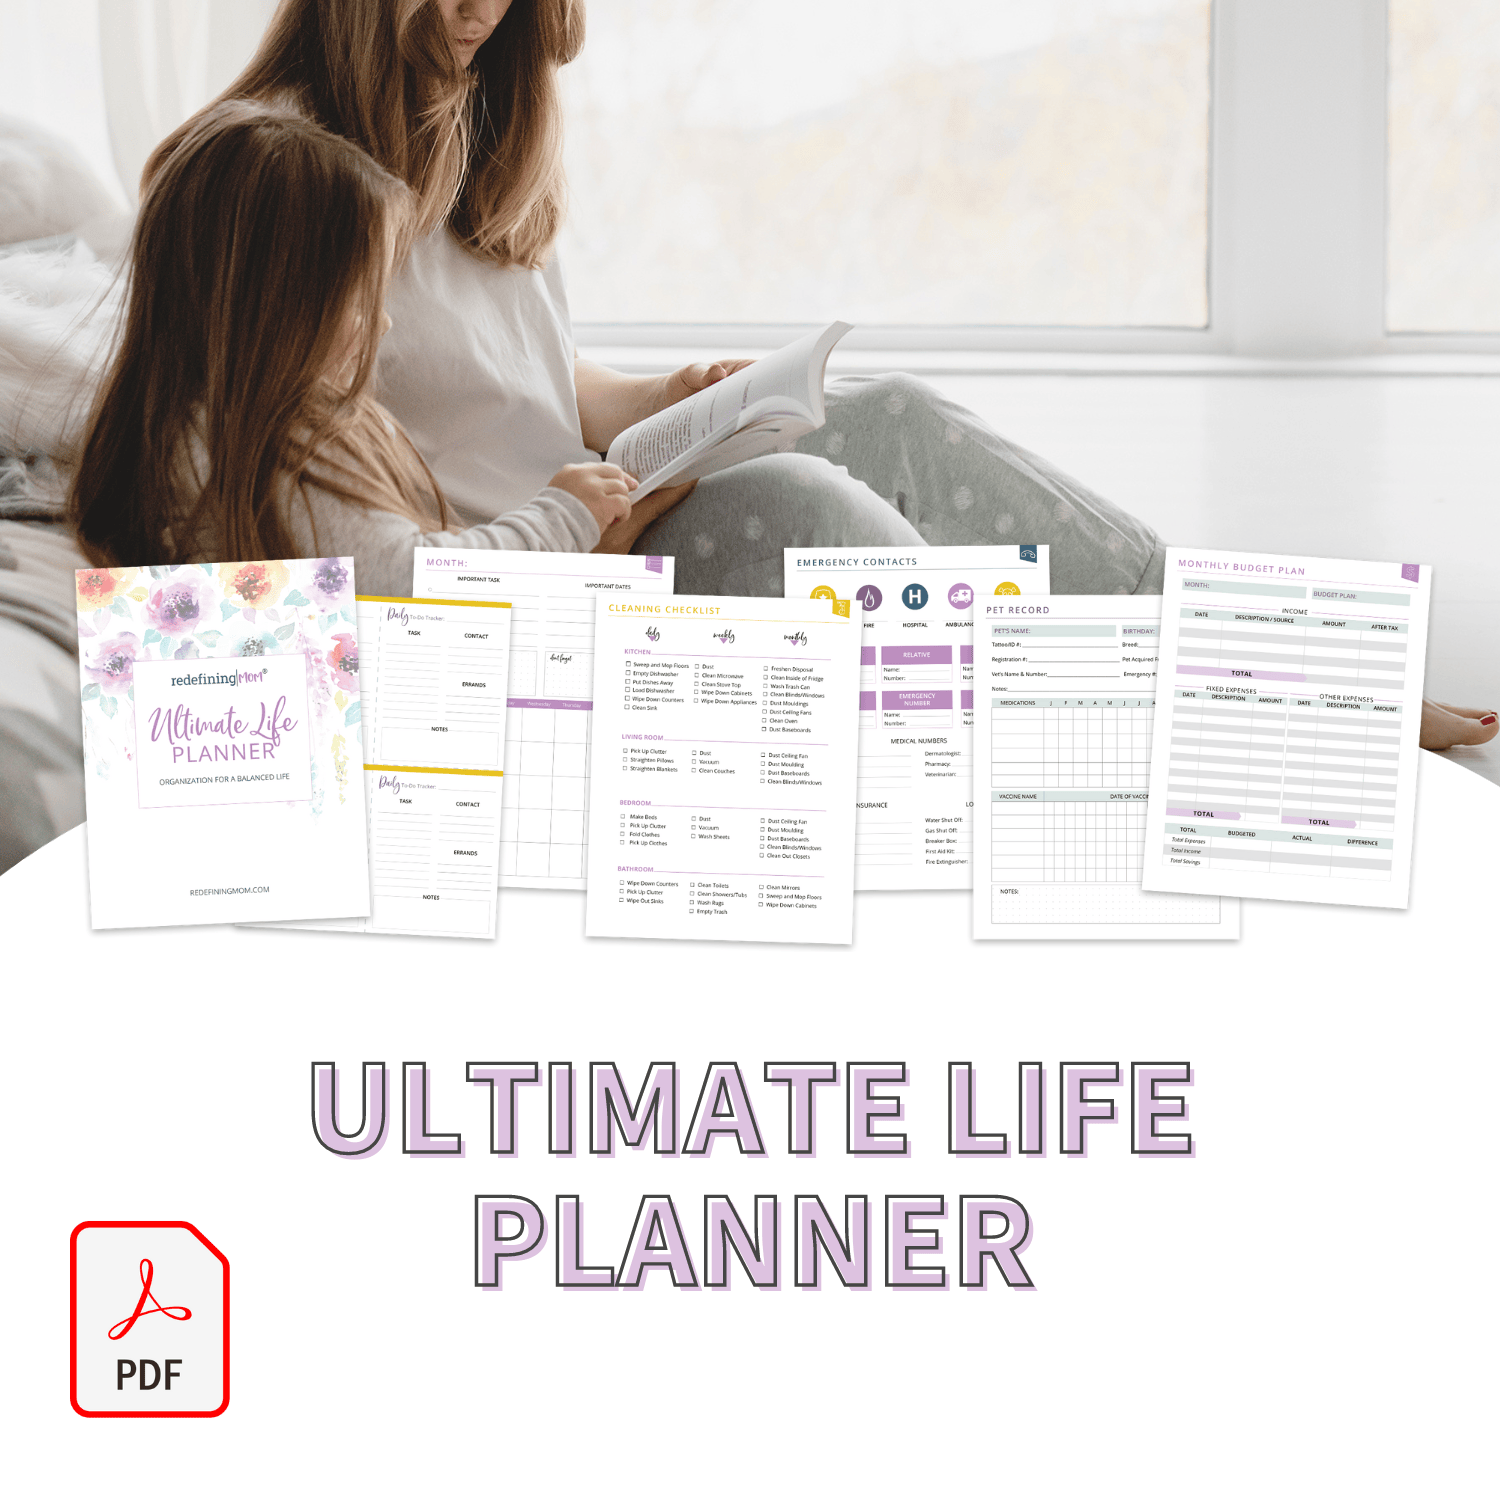 ultimate life planner to organize your entire home and family life